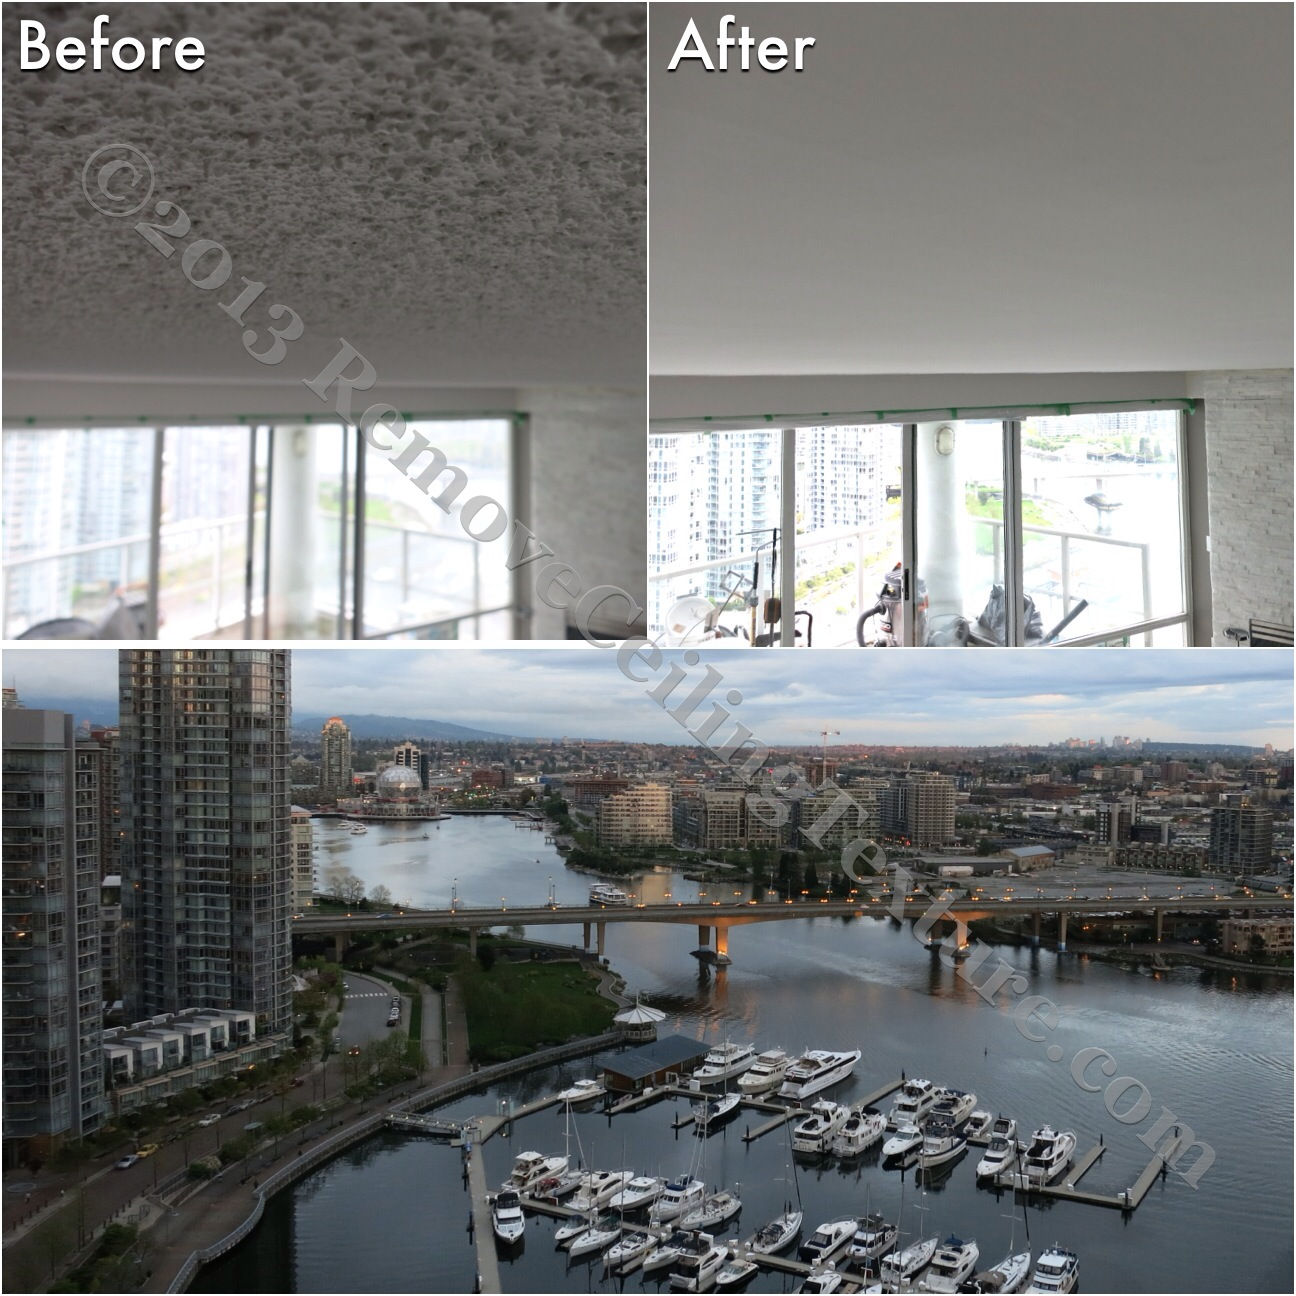 The ugly ceiling texture is removed and no longer competes with the million dollar view of False Creek